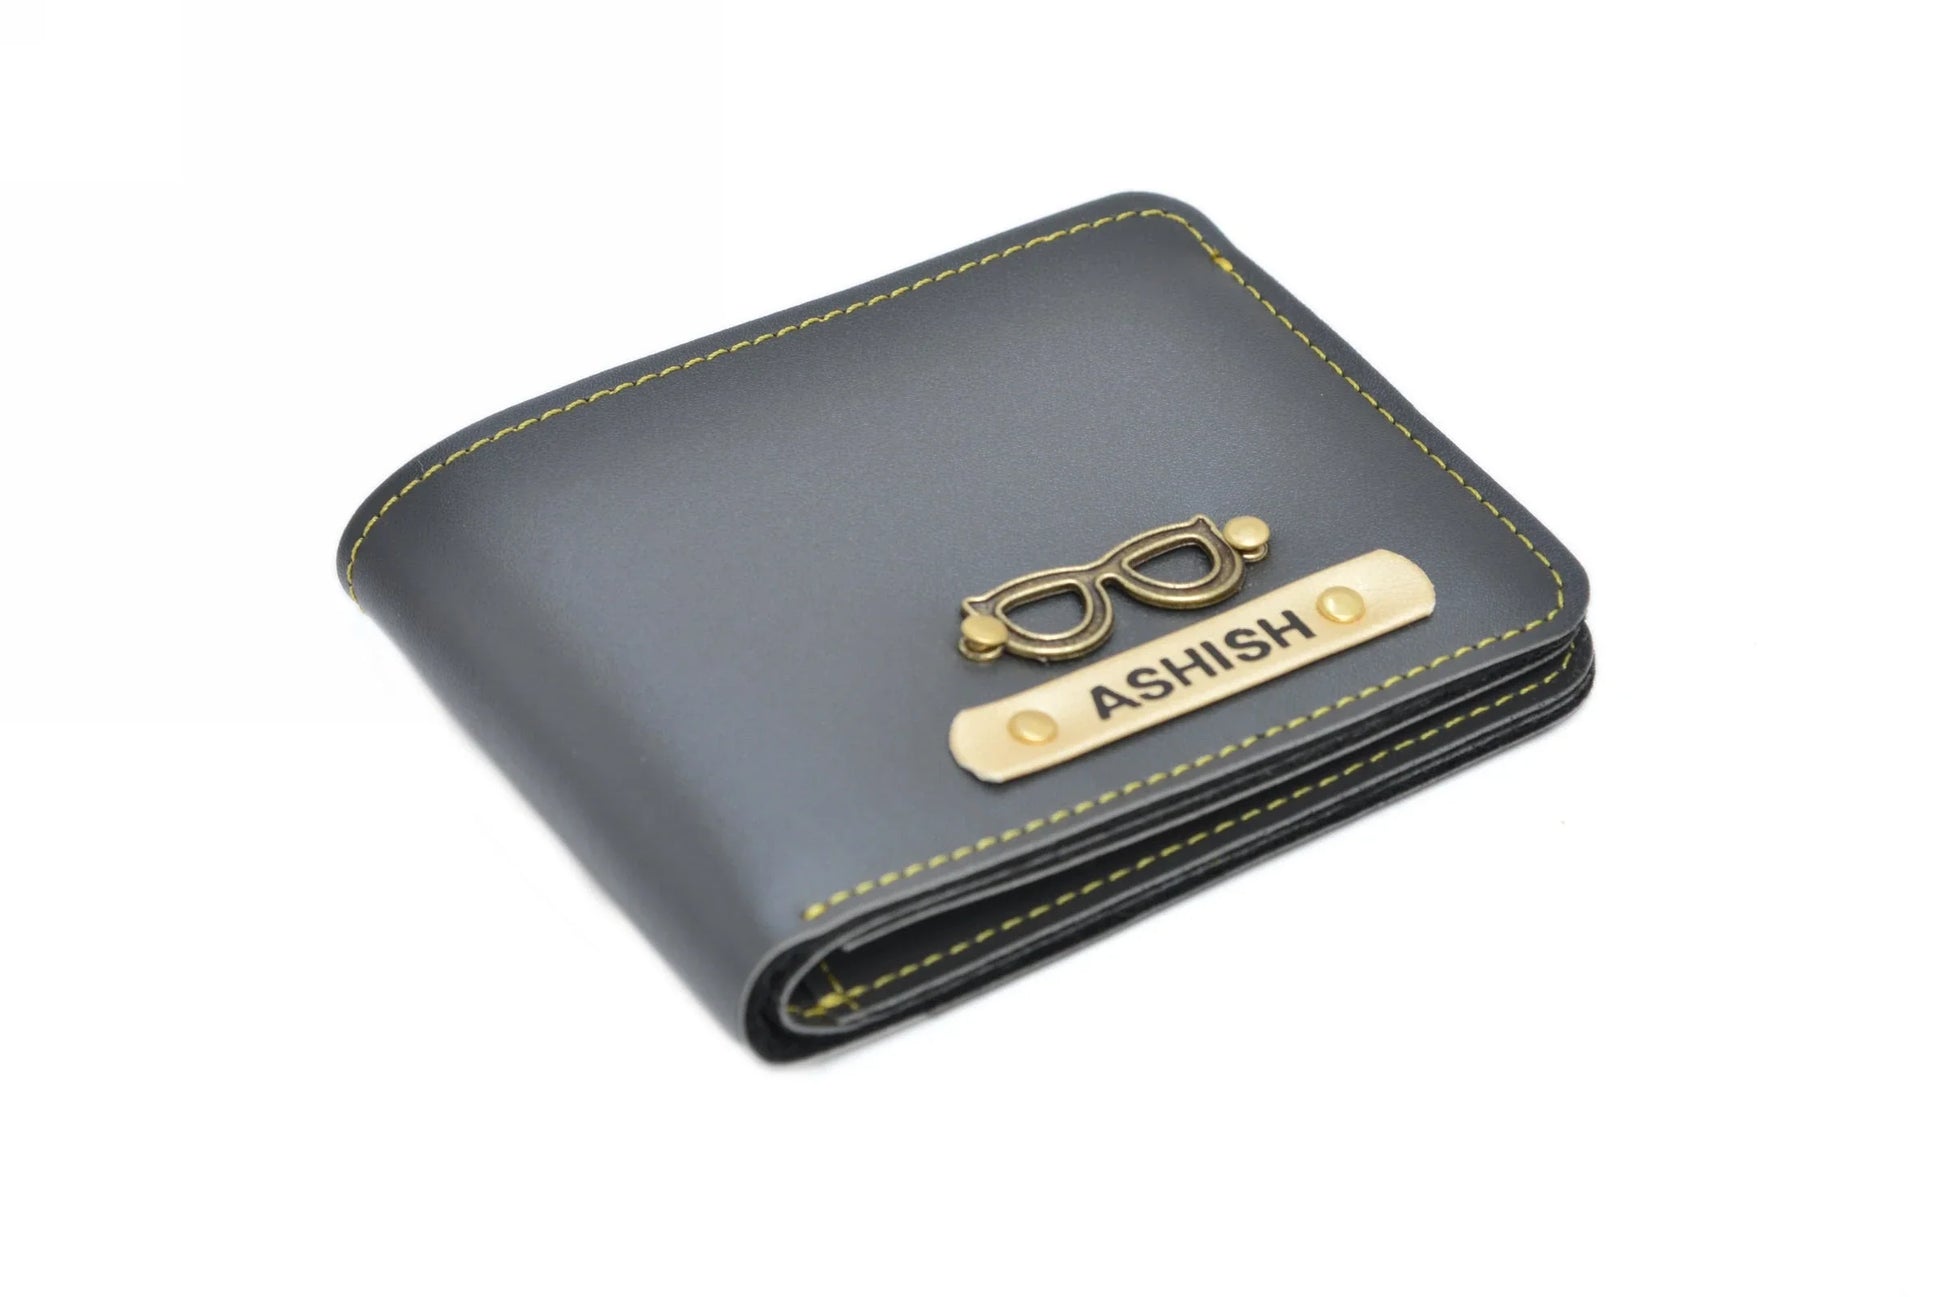 personalized-mens-wallet-grey-customized-best-gift-for-boyfriend-girlfriend.Personalized Men's Wallet - Grey. Lavish wallet made with the supreme quality synthetic leather is the perfect touch to any office/formal attire. The option to personalize it with your name and lucky charm makes it that much more special and close to heart. This is the best corporate gift! Always be trending and in fashion with our customized wallets. The Mens Wallet material is vegan/synthetic/faux/PU leather